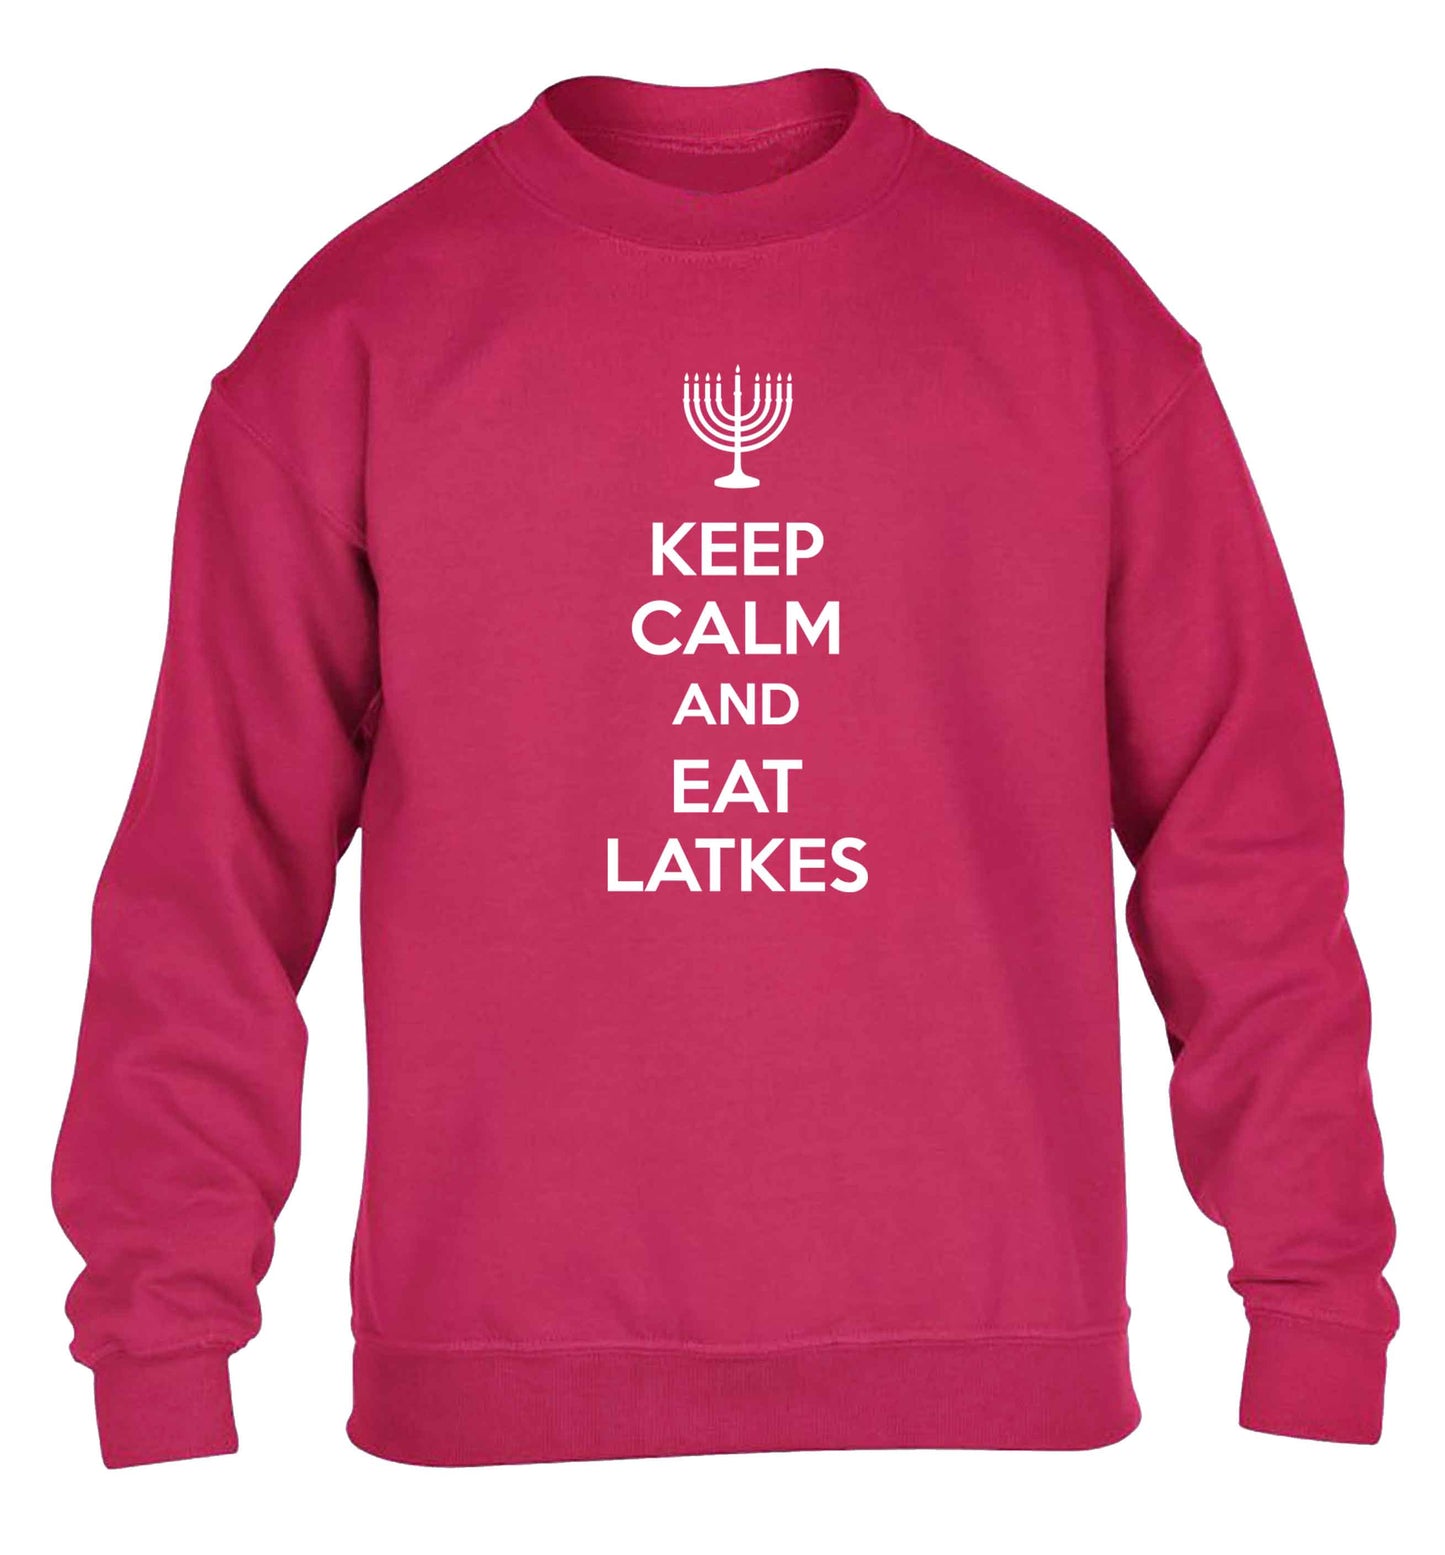 Keep calm and eat latkes children's pink sweater 12-13 Years